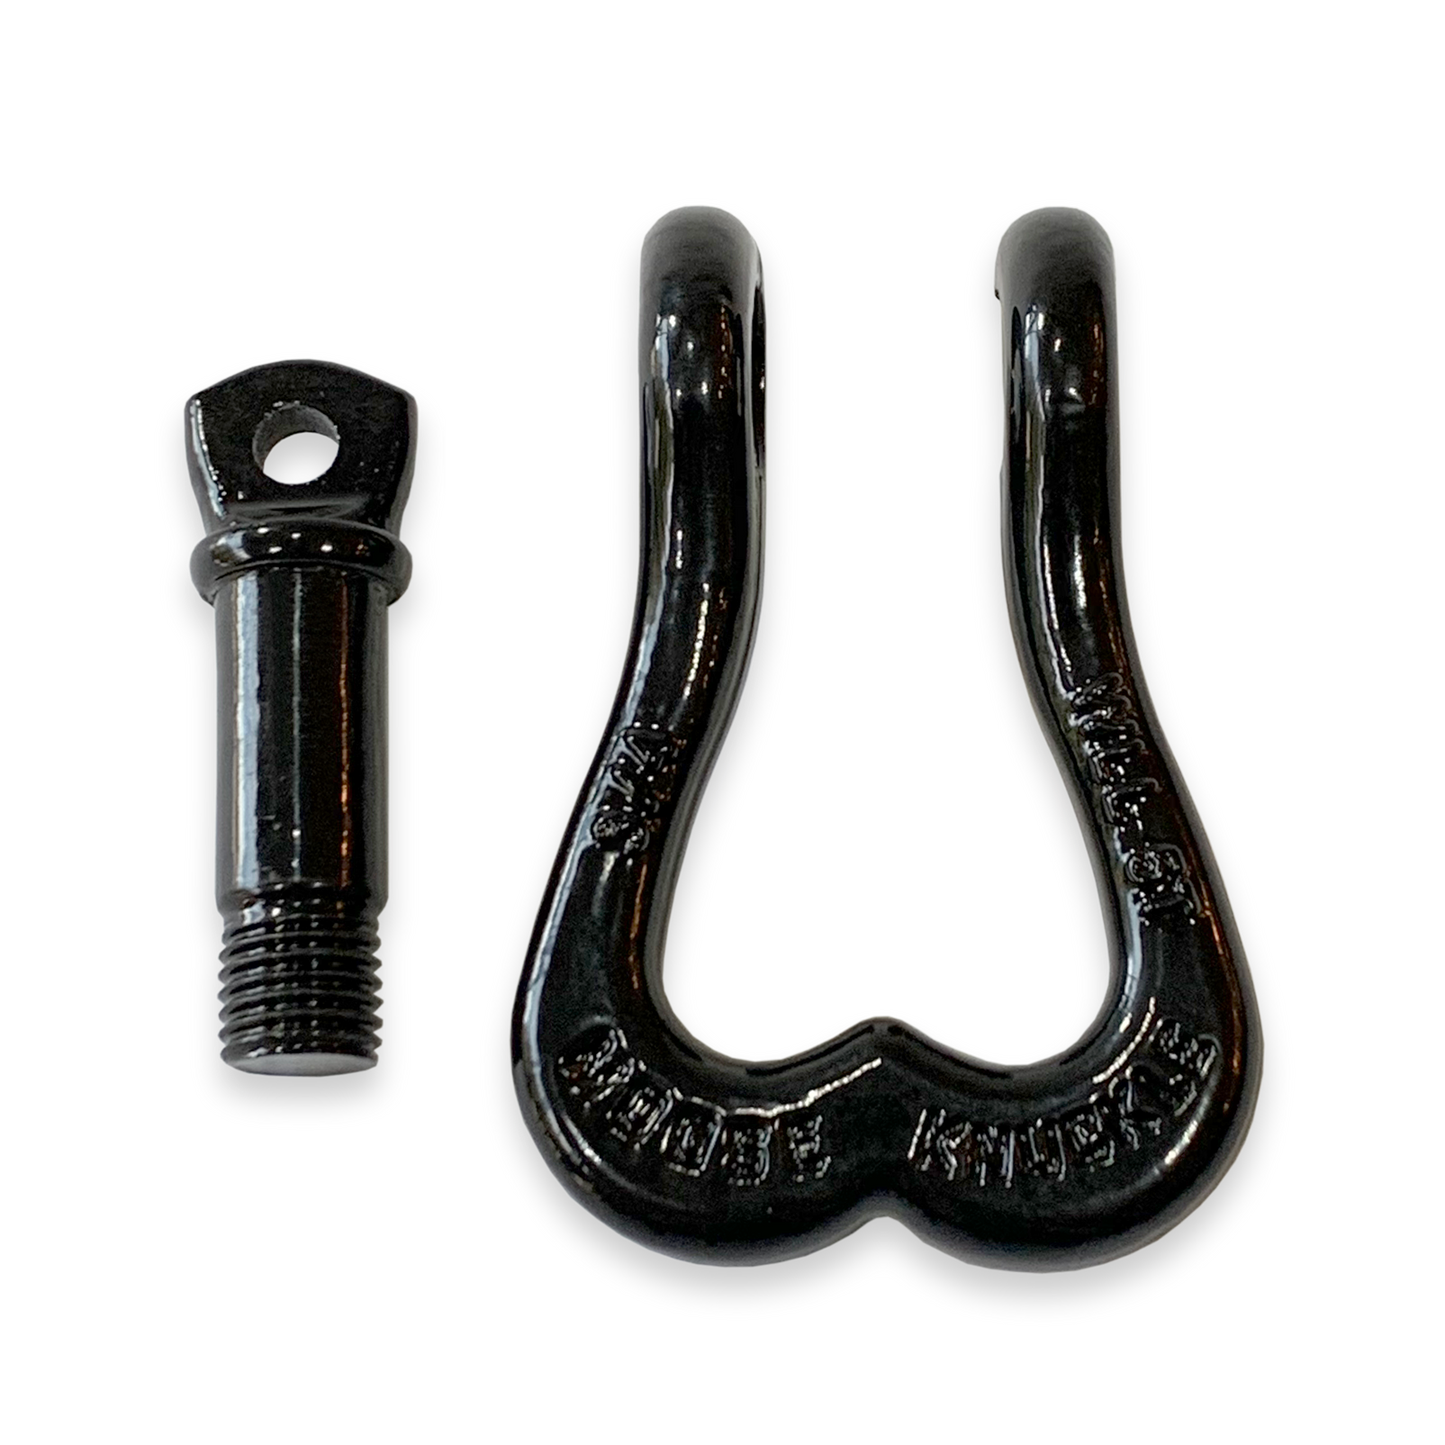 Moose Knuckle XL Black Hole Heavy Duty Extra Strong Patent Pending 3/4" Shackle for Off-Road Vehicle Recovery to Replace Bull Balls